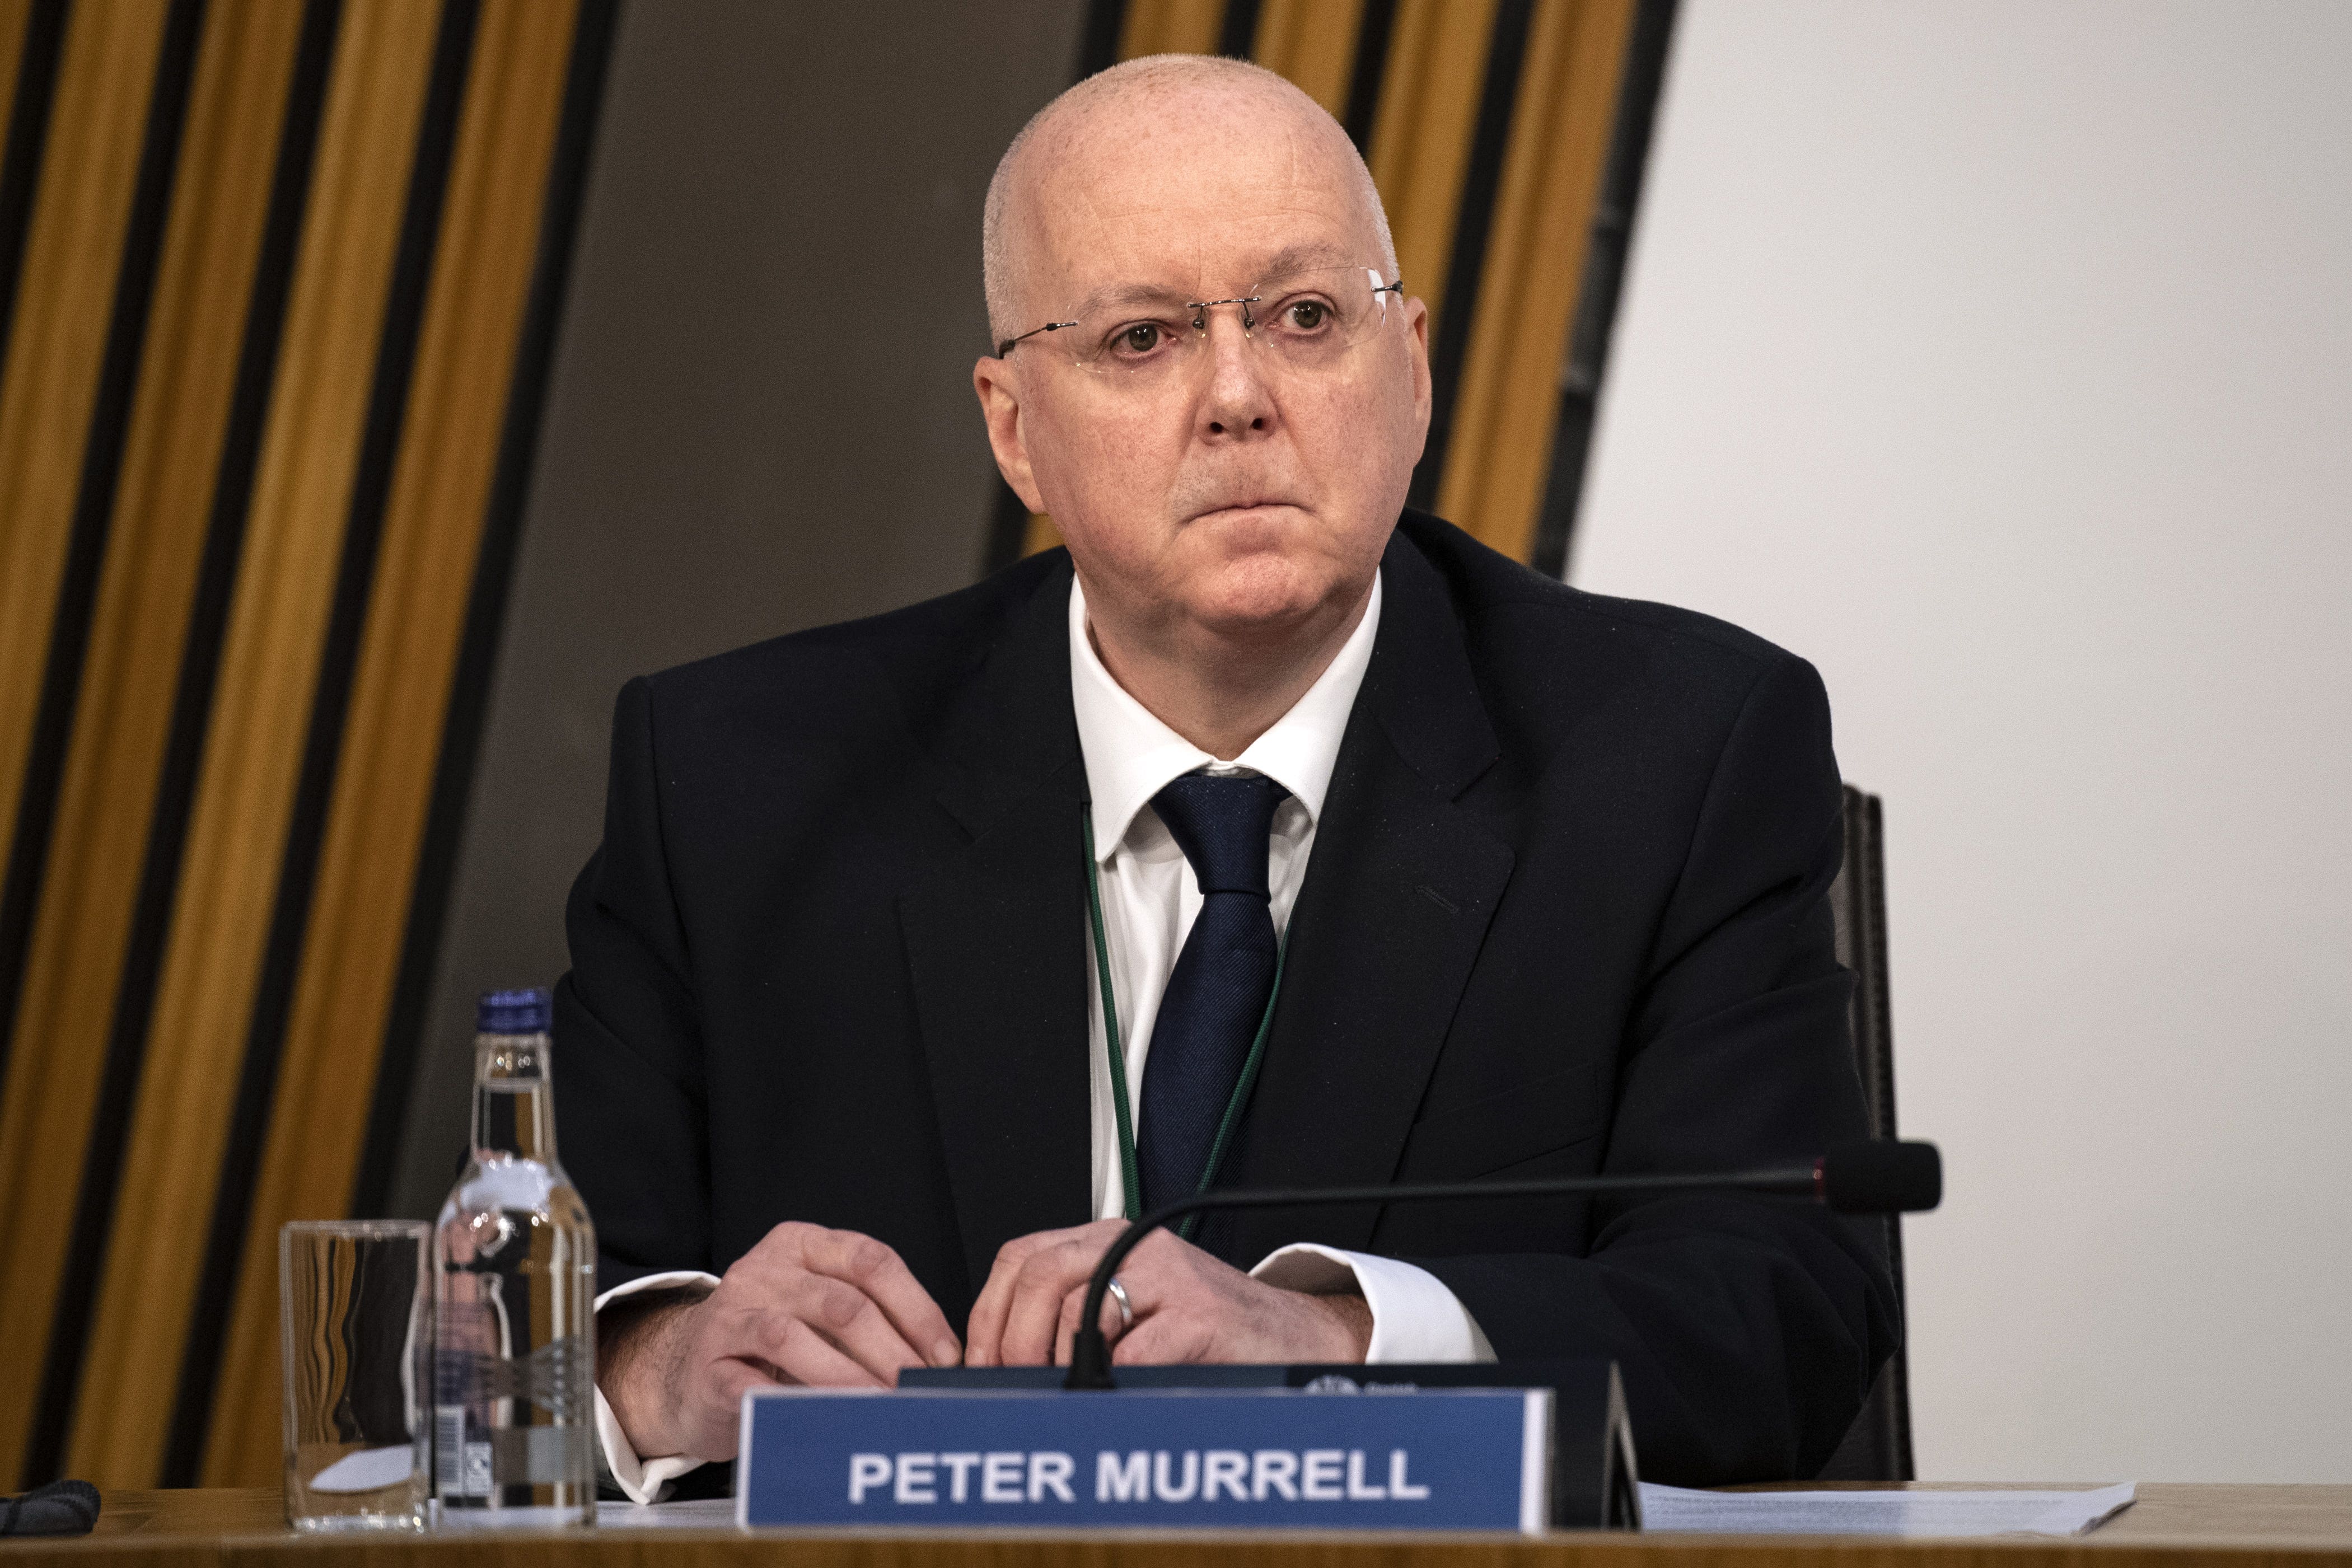 Murrell has allegedly been rearrested in connection with an investigation into the SNP’蝉 finances